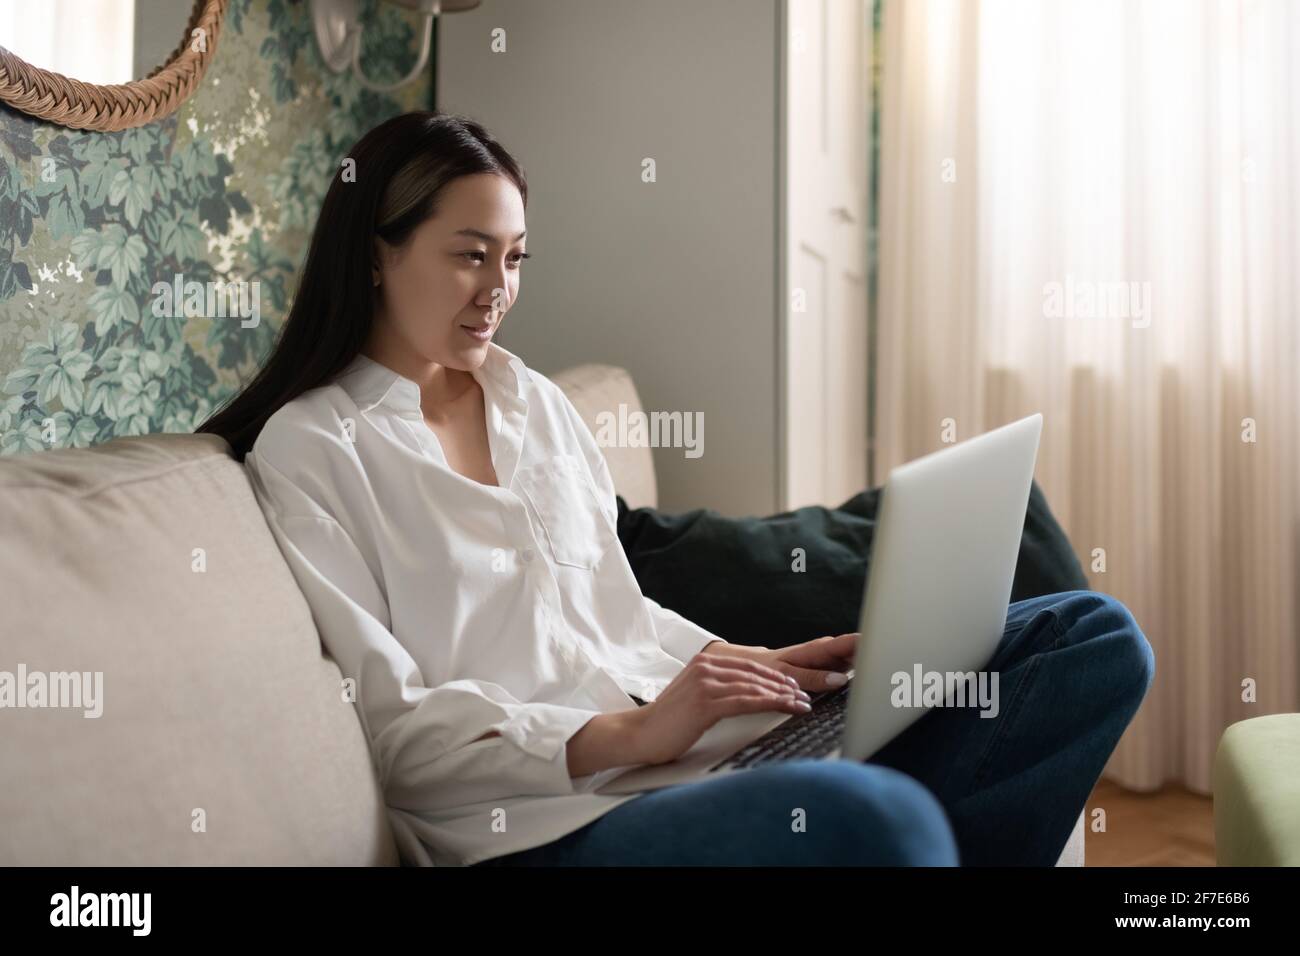 Asian woman using laptop on sofa Banque D'Images